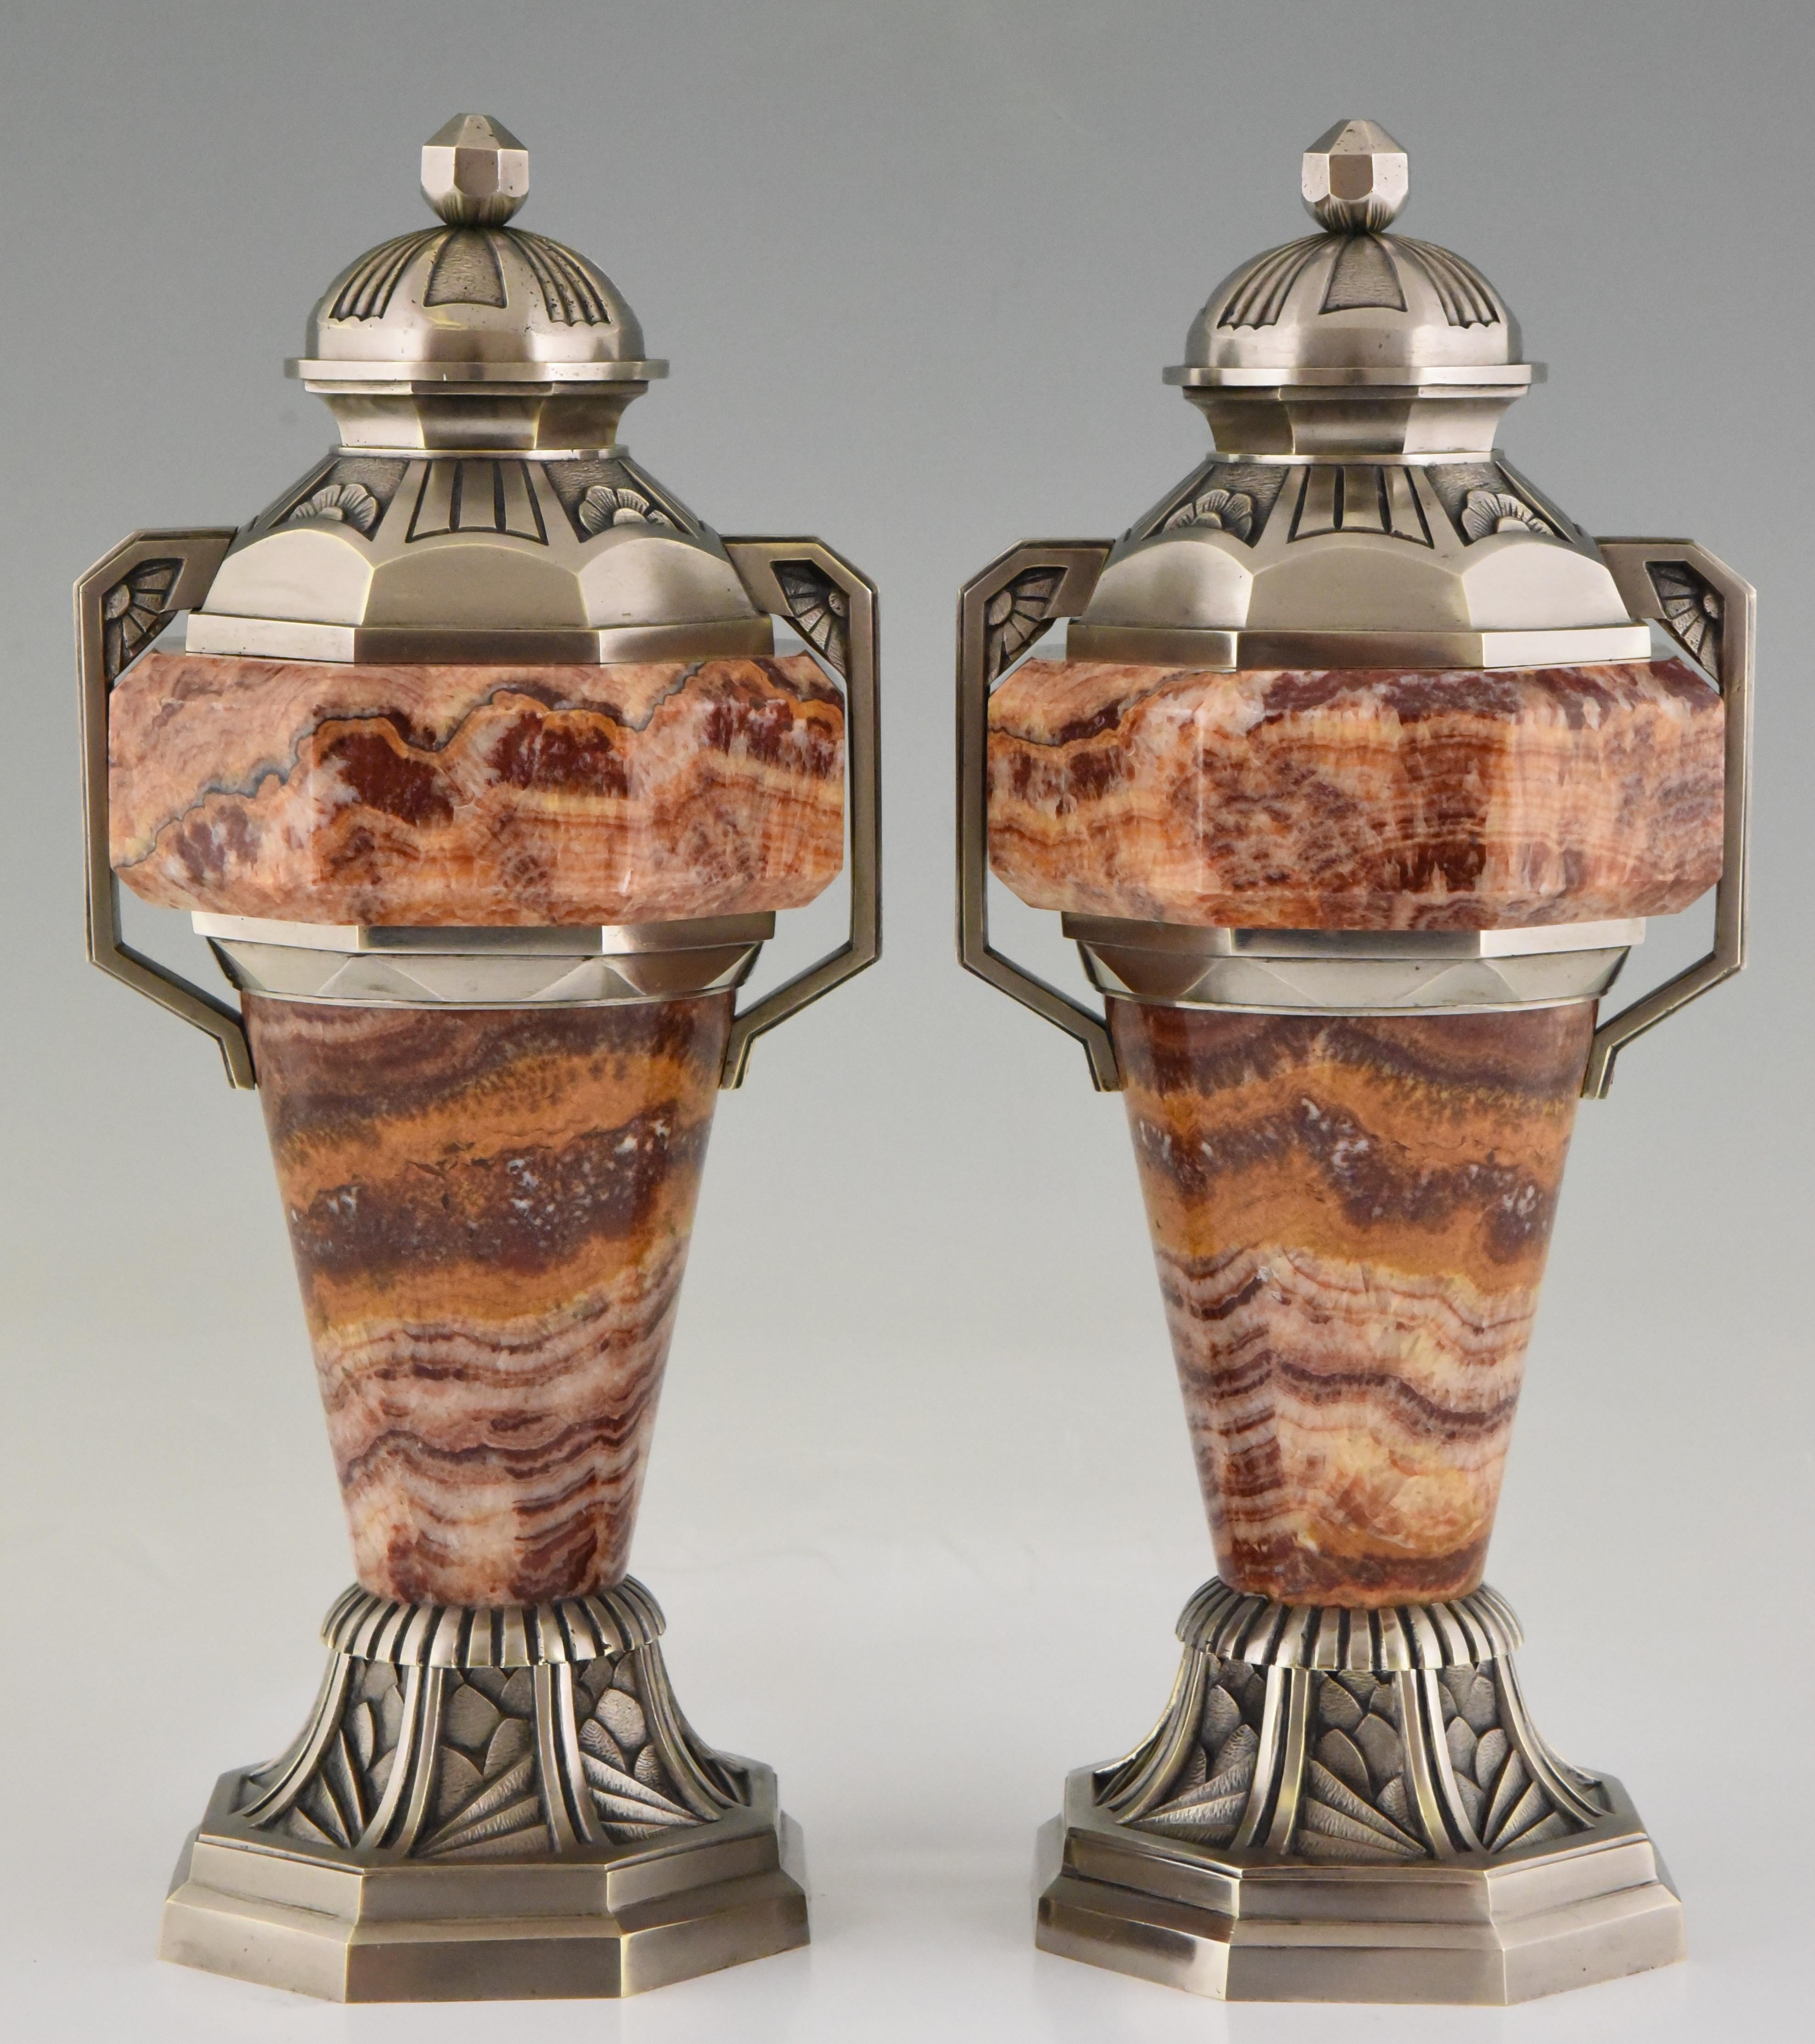 Pair of Art Deco urns in red marble and bronze with silver patina. 
These beautiful cassoulet vases are made in France, circa 1925.